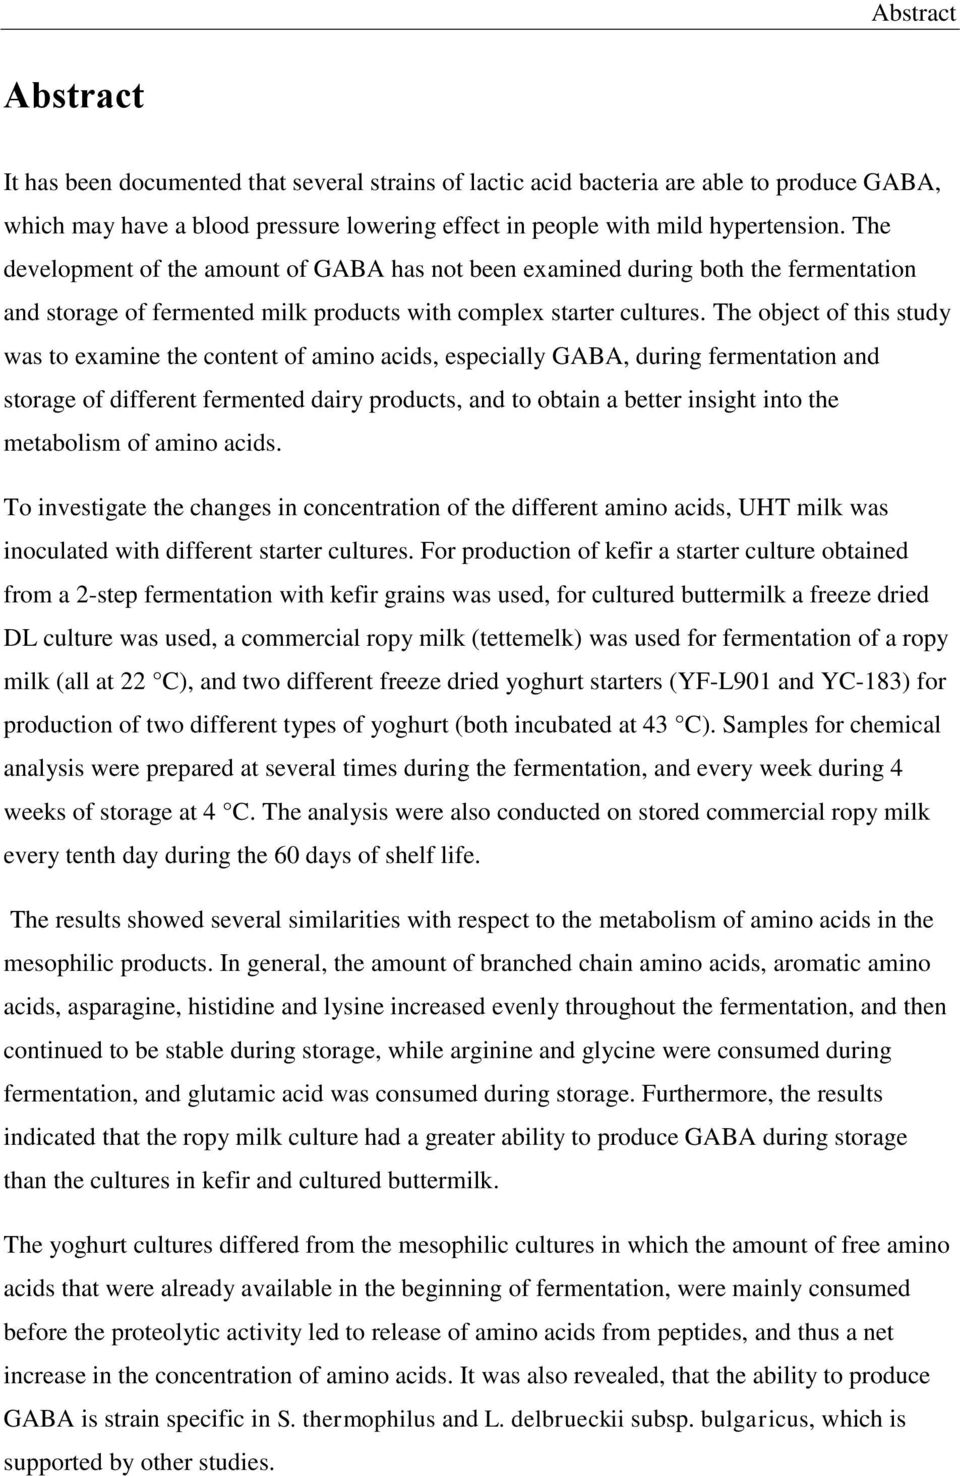 The object of this study was to examine the content of amino acids, especially GABA, during fermentation and storage of different fermented dairy products, and to obtain a better insight into the